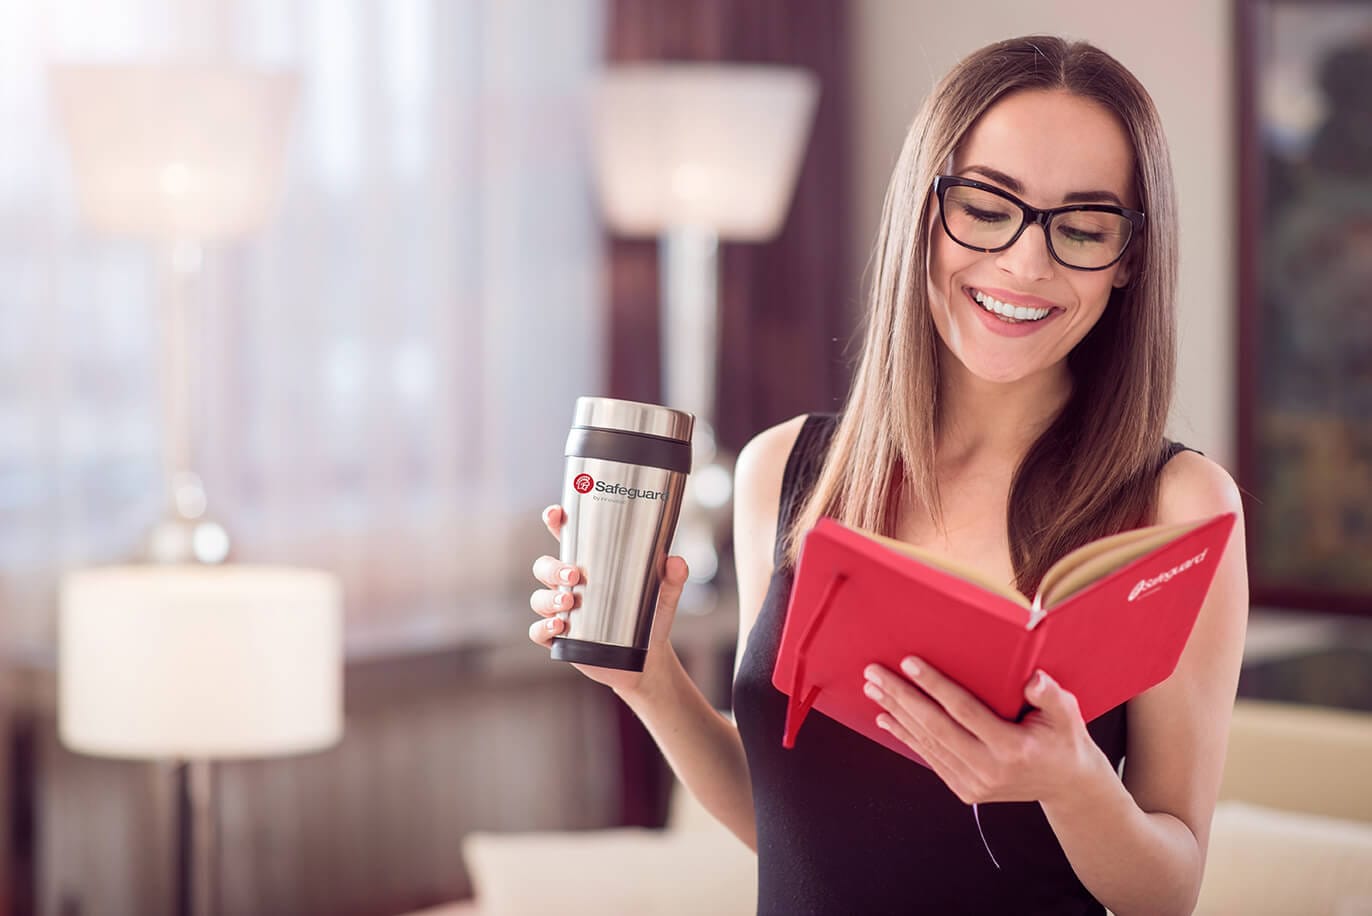 Smiling woman holding a Safeguard mug and notebook.